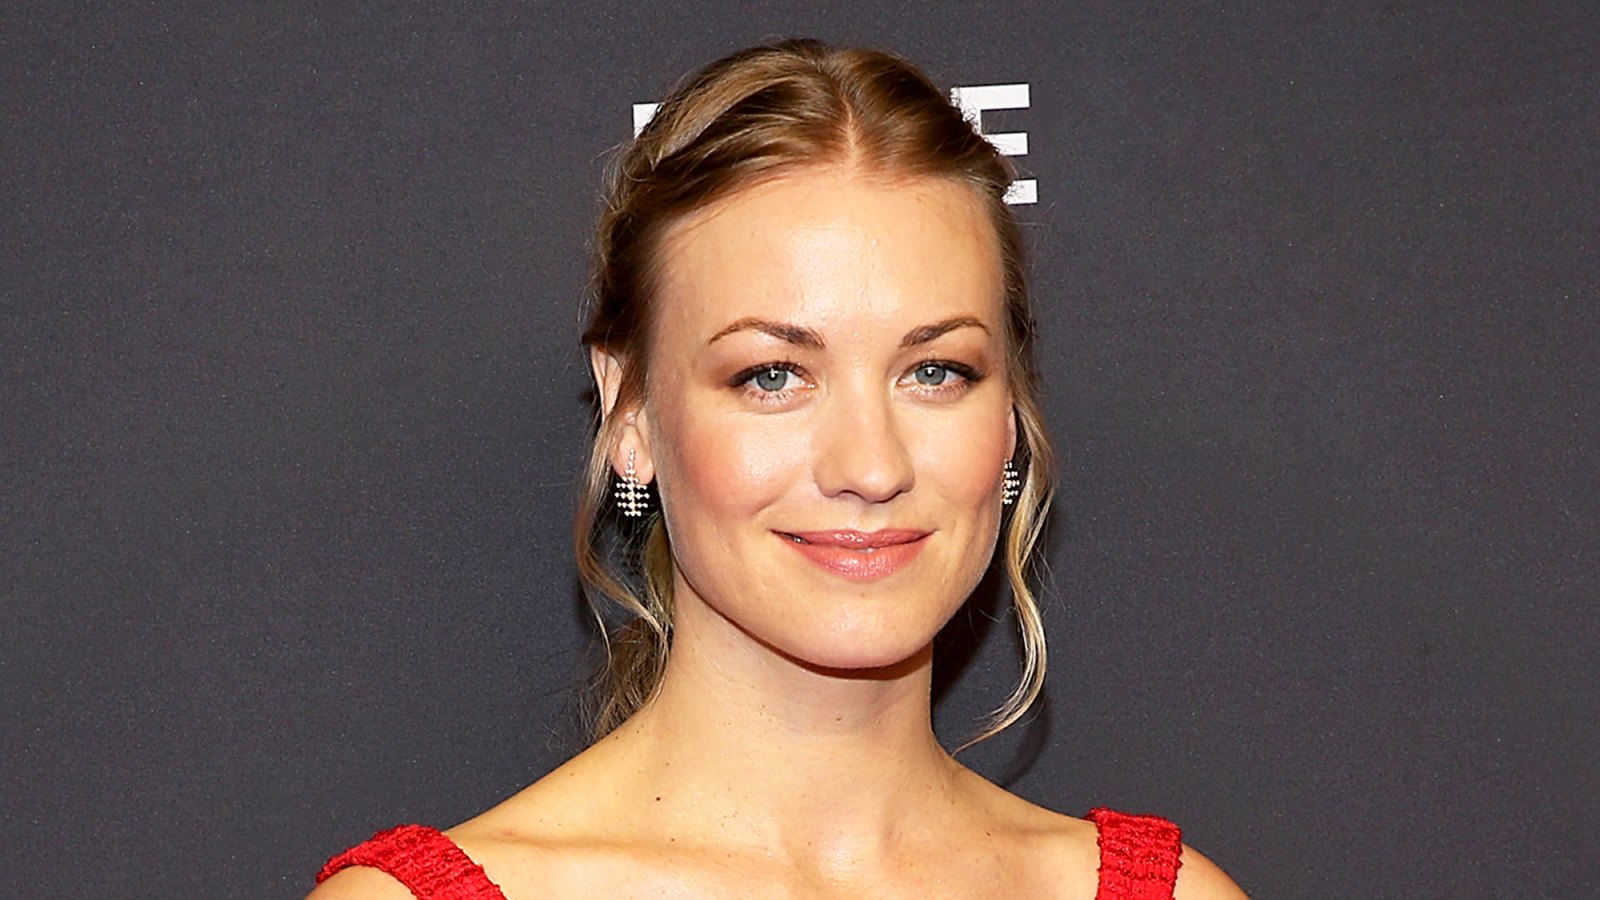 Yvonne Strahovski attends the 2018 PaleyFest Los Angeles Hulu's "The Handmaid's Tale" at Dolby Theatre in Hollywood, California.